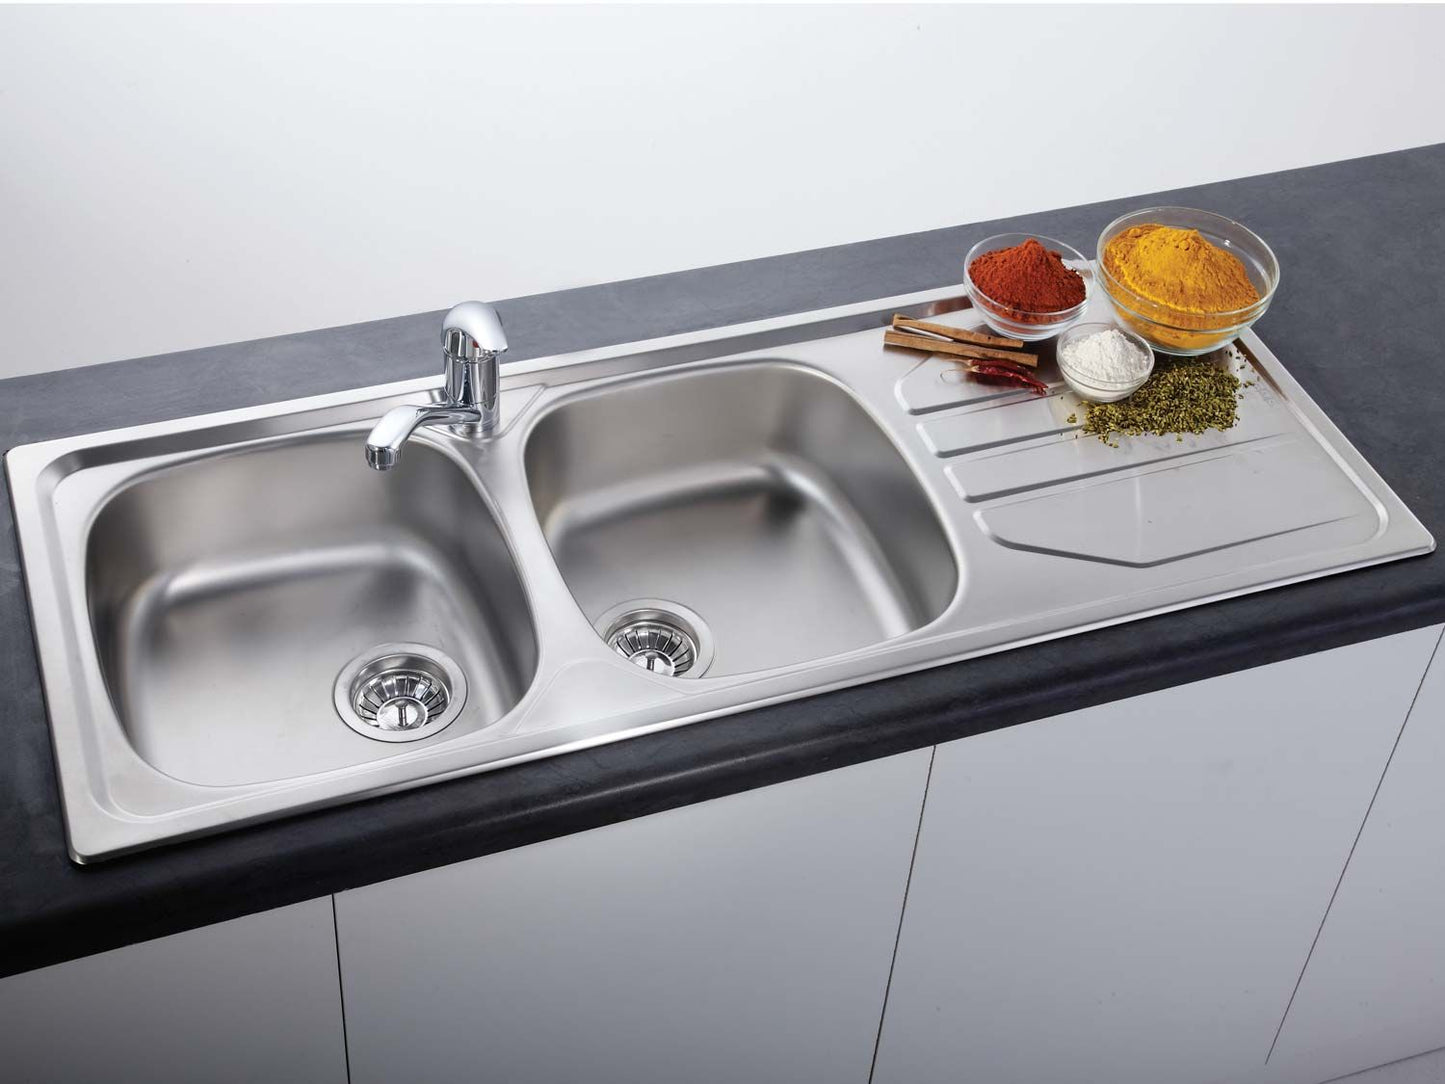 Double Bowl Kitchen Sink - Inset/ Drop-In - Stainless steel - Franke Nouveau NVN 621